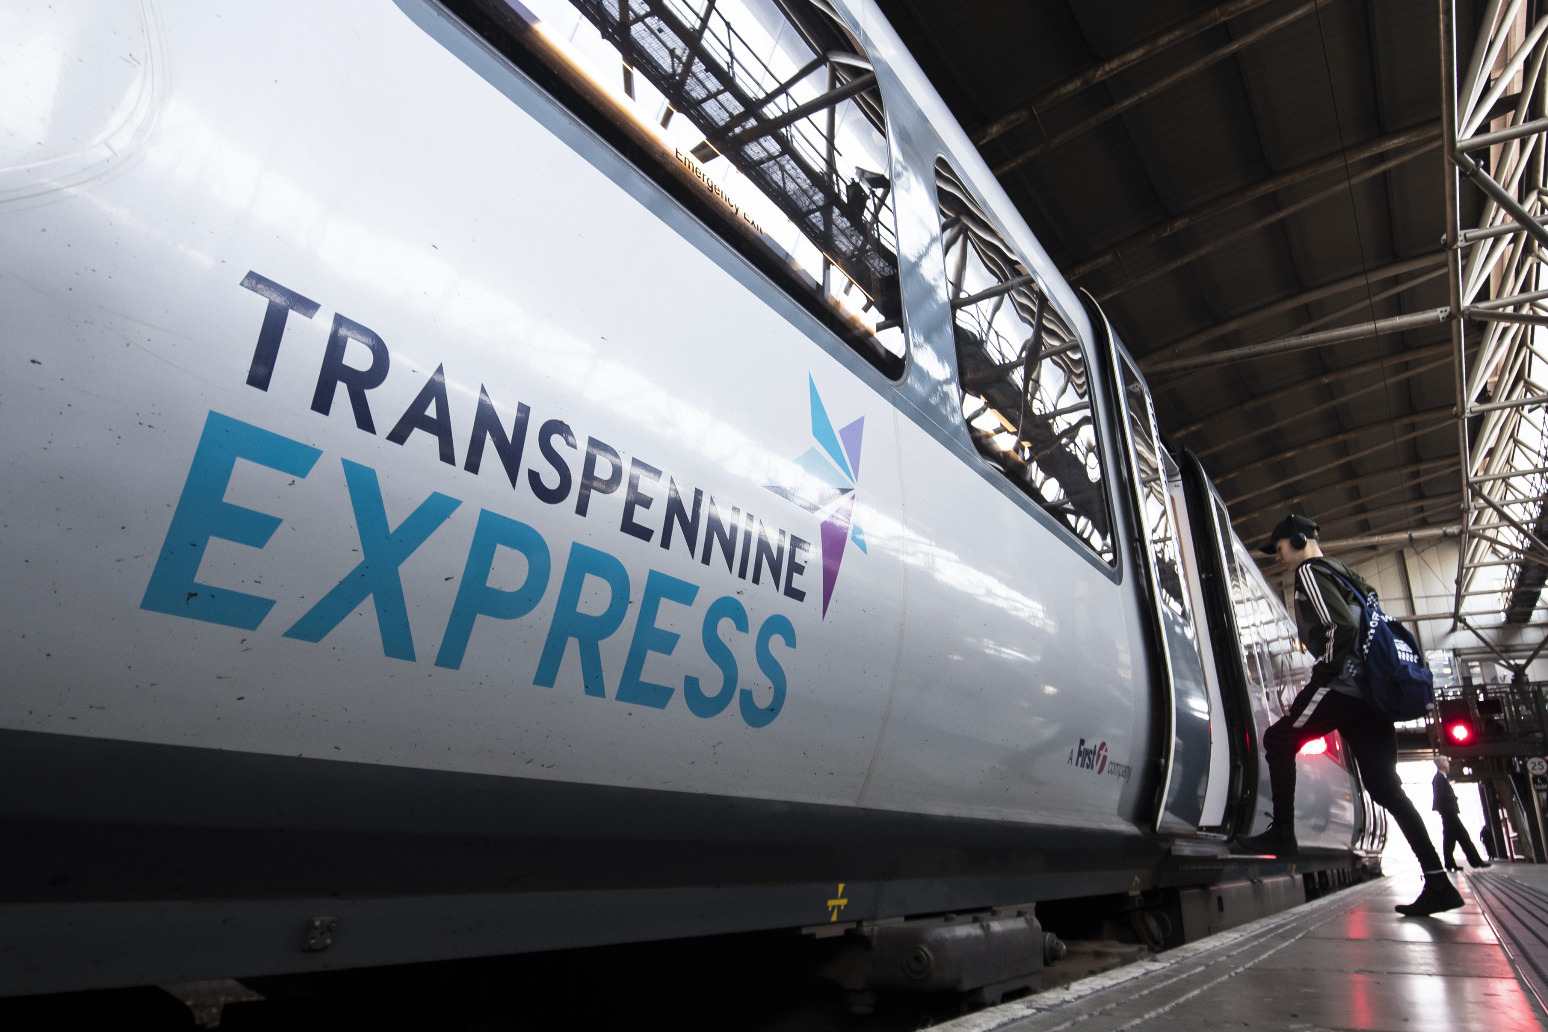 Calls to nationalise TransPennine Express after ‘one of worst days yet’ 